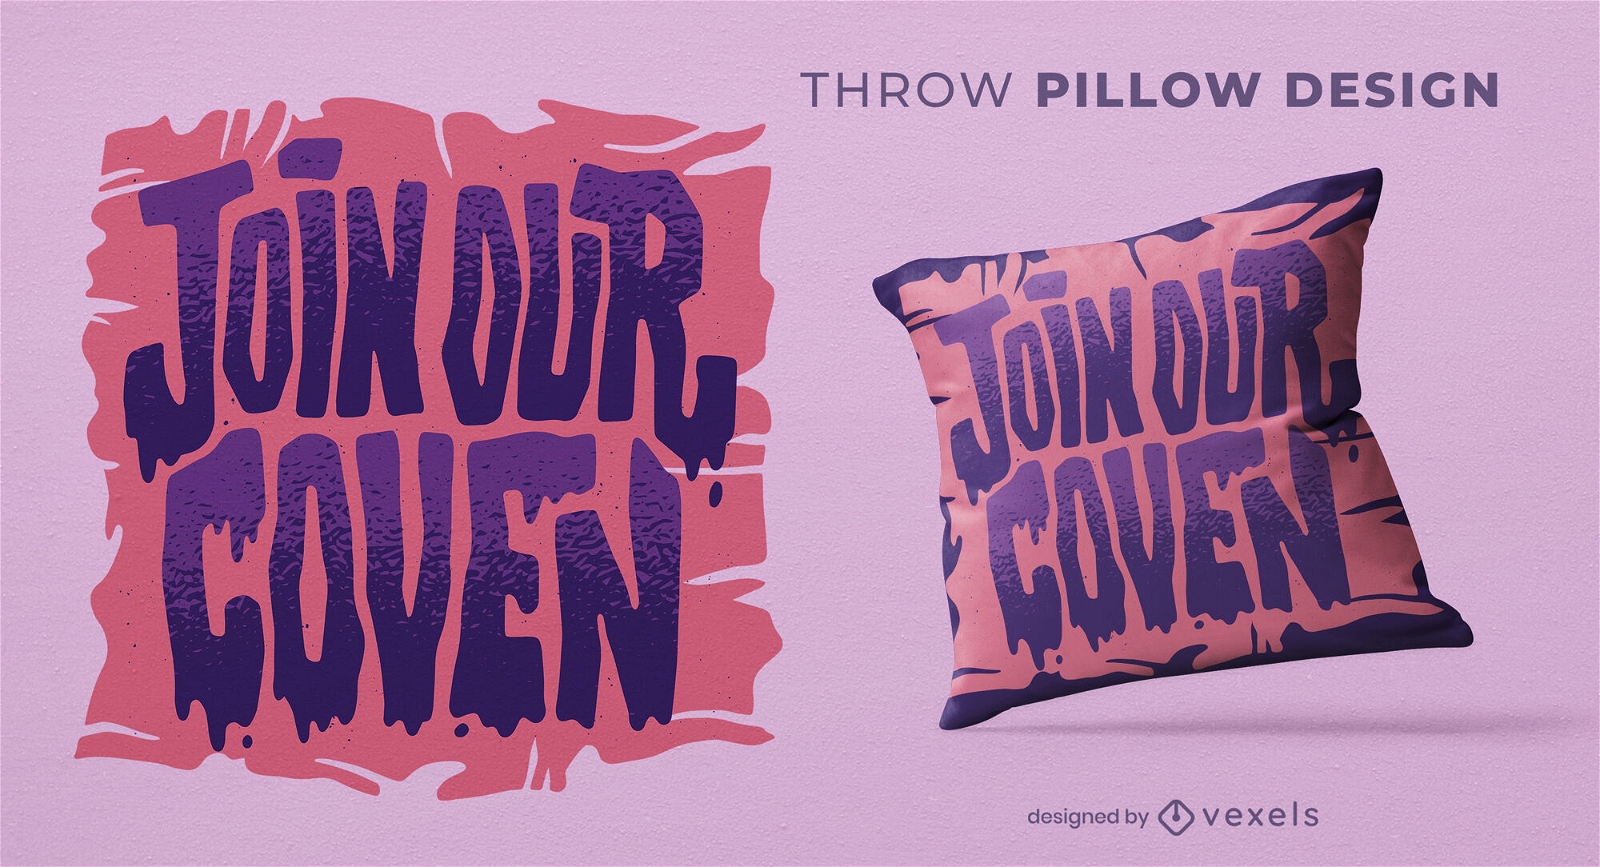 Join our coven halloween throw pillow design